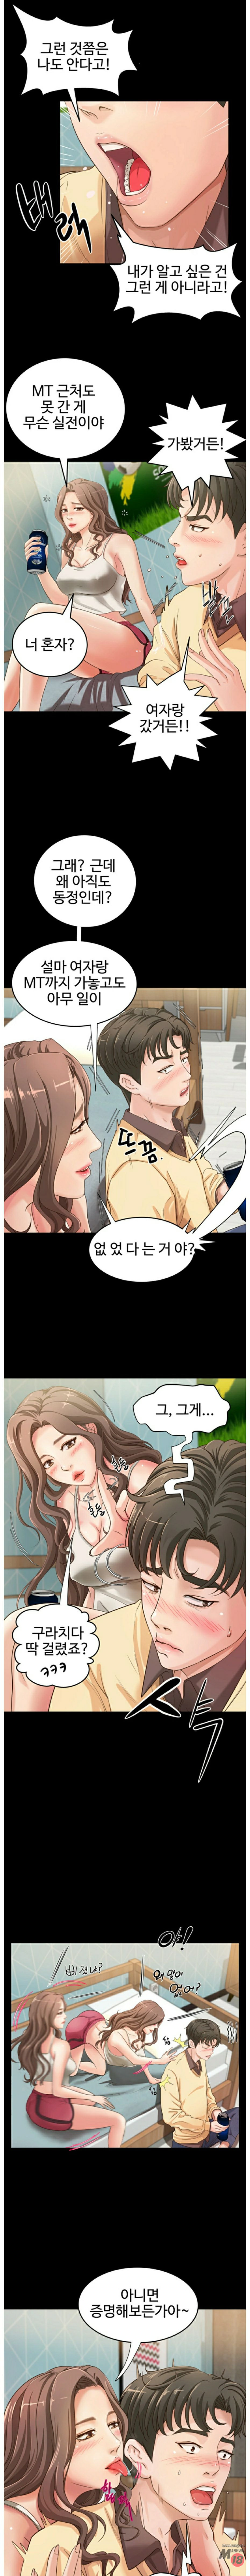 Sister’s Sex Education Raw - Chapter 2 Page 8